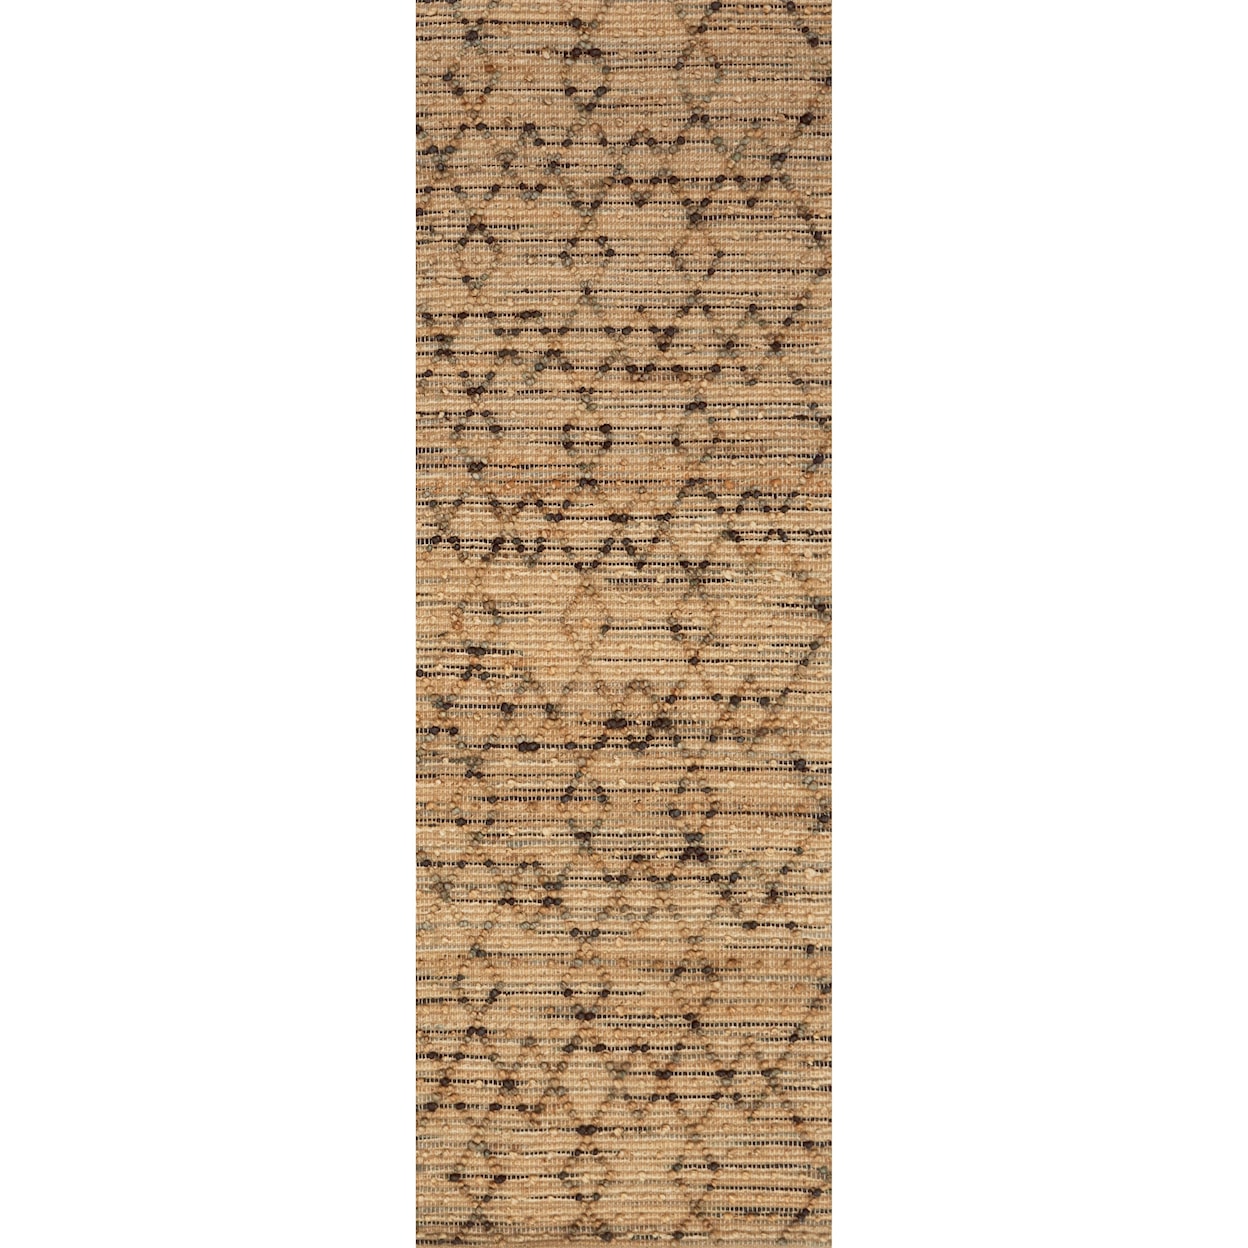 Reeds Rugs BEACON 1'6" x 1'6"  Charcoal Rug